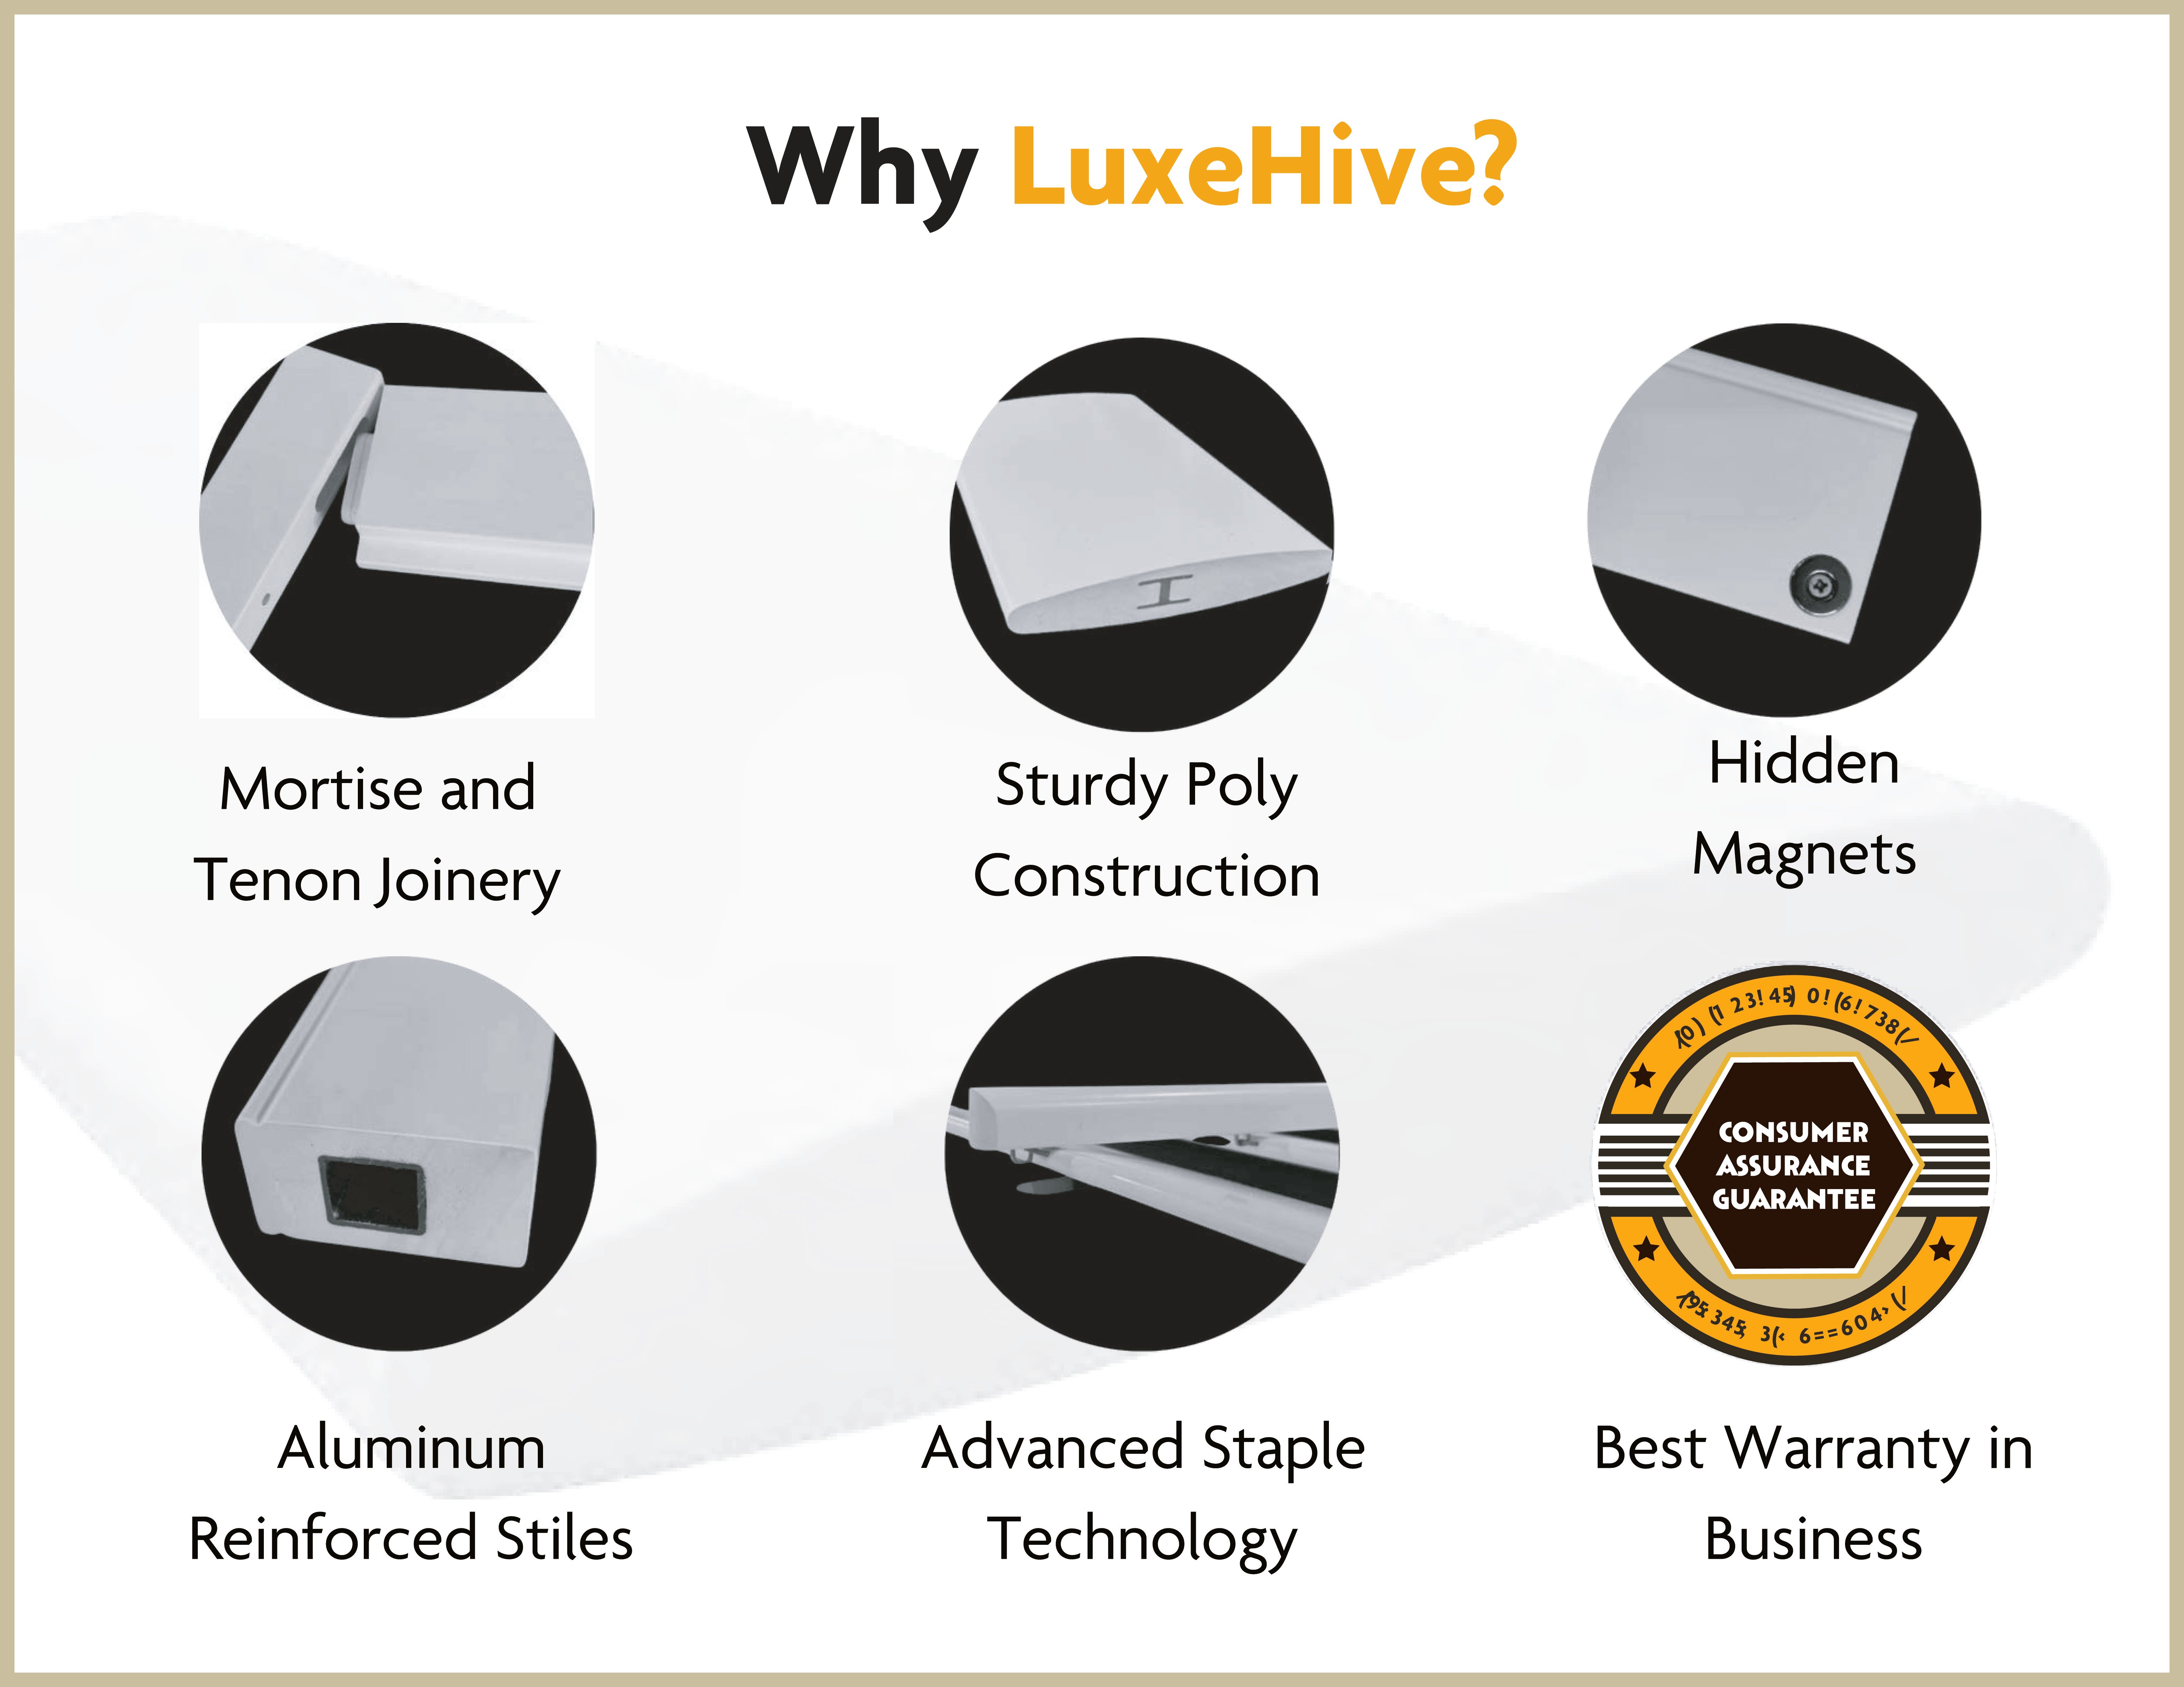 Why LuxeHive?